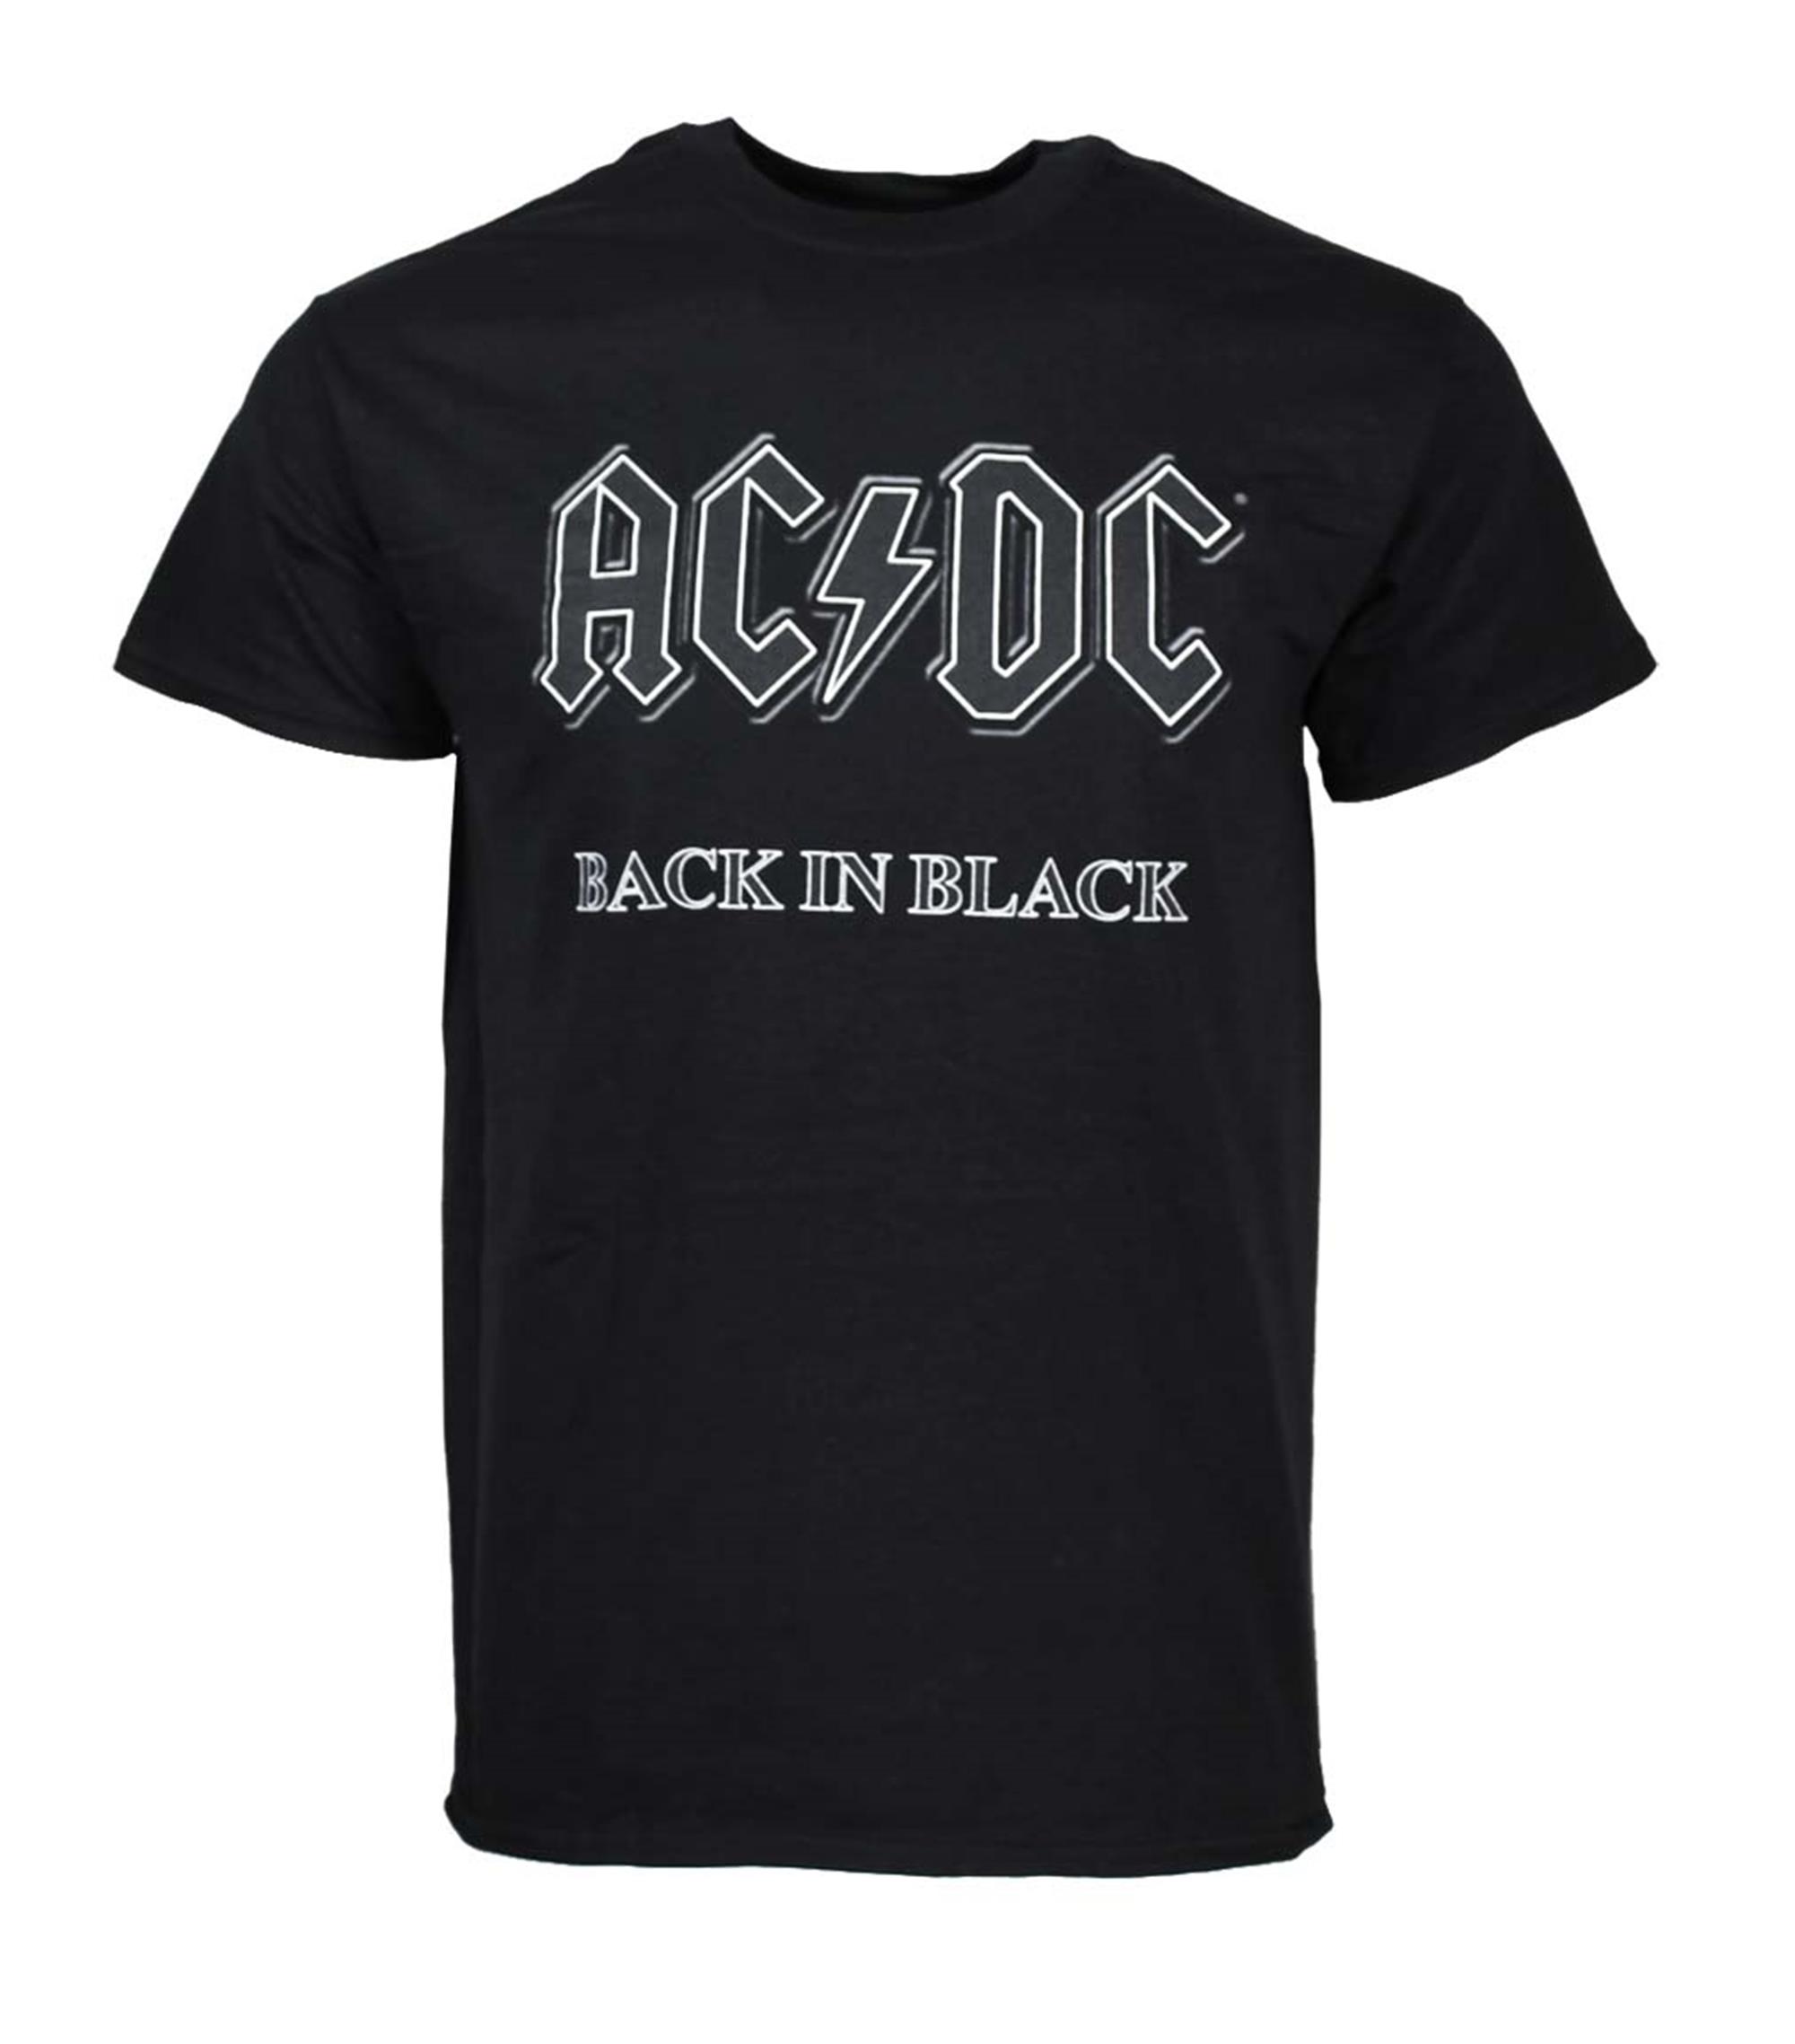 Acdc Acdc Back In Black T Shirt